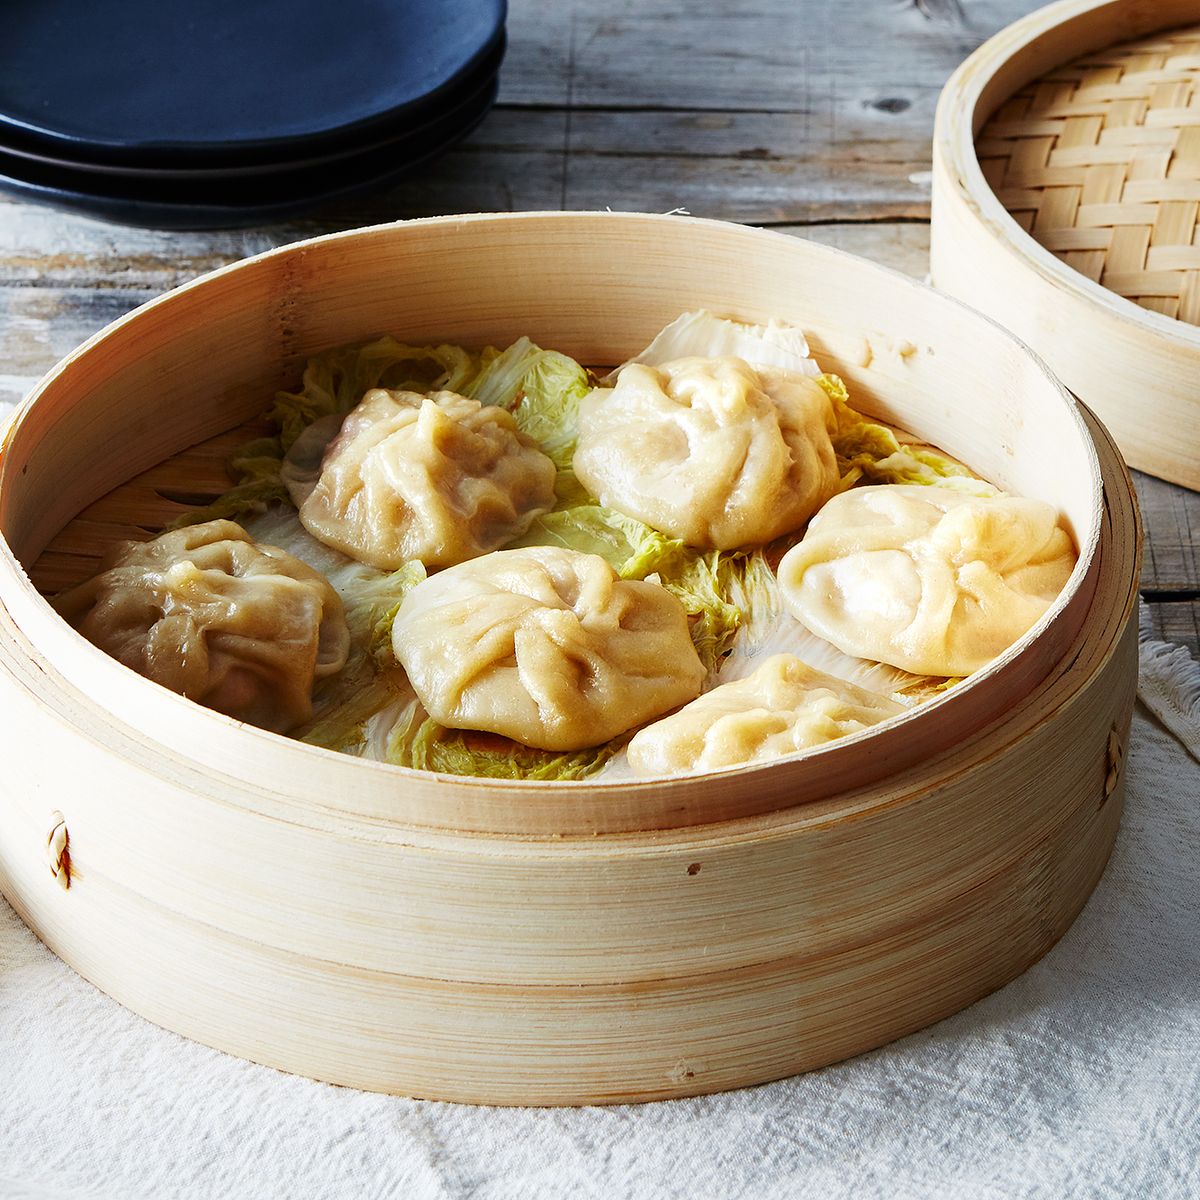 How To Make Chinese Soup Dumplings At Home